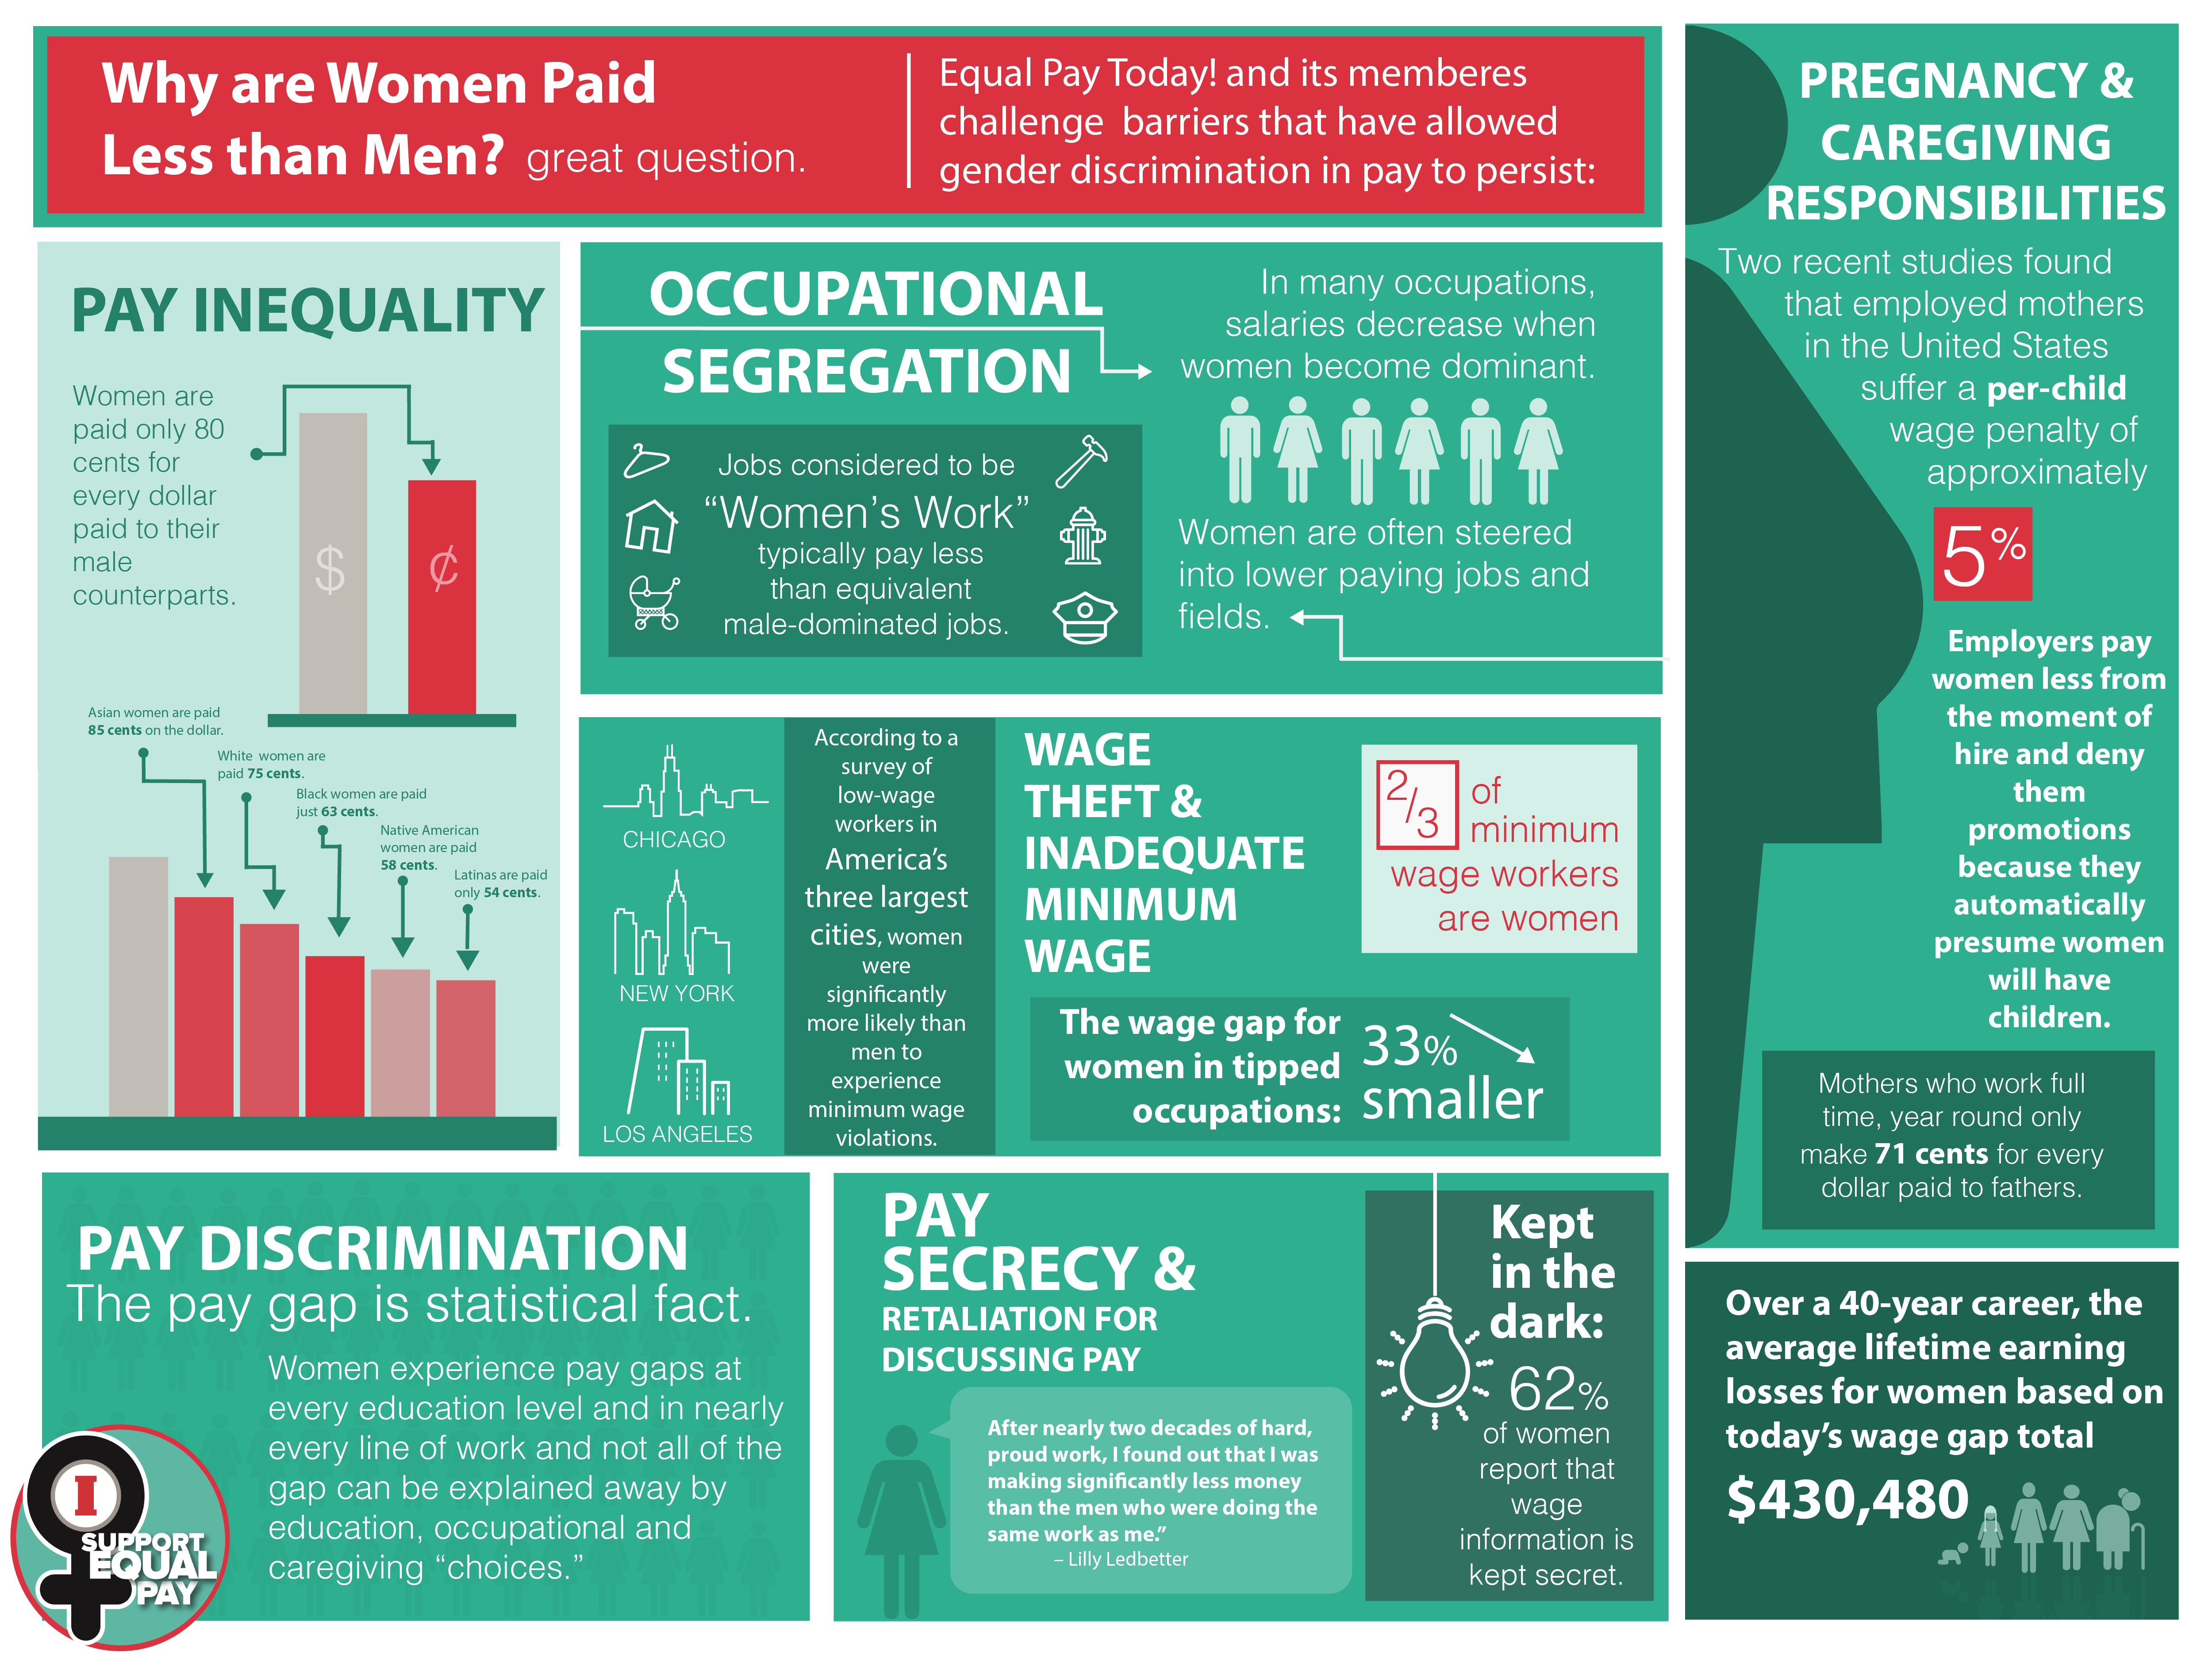 Equal ay Today infographic facts